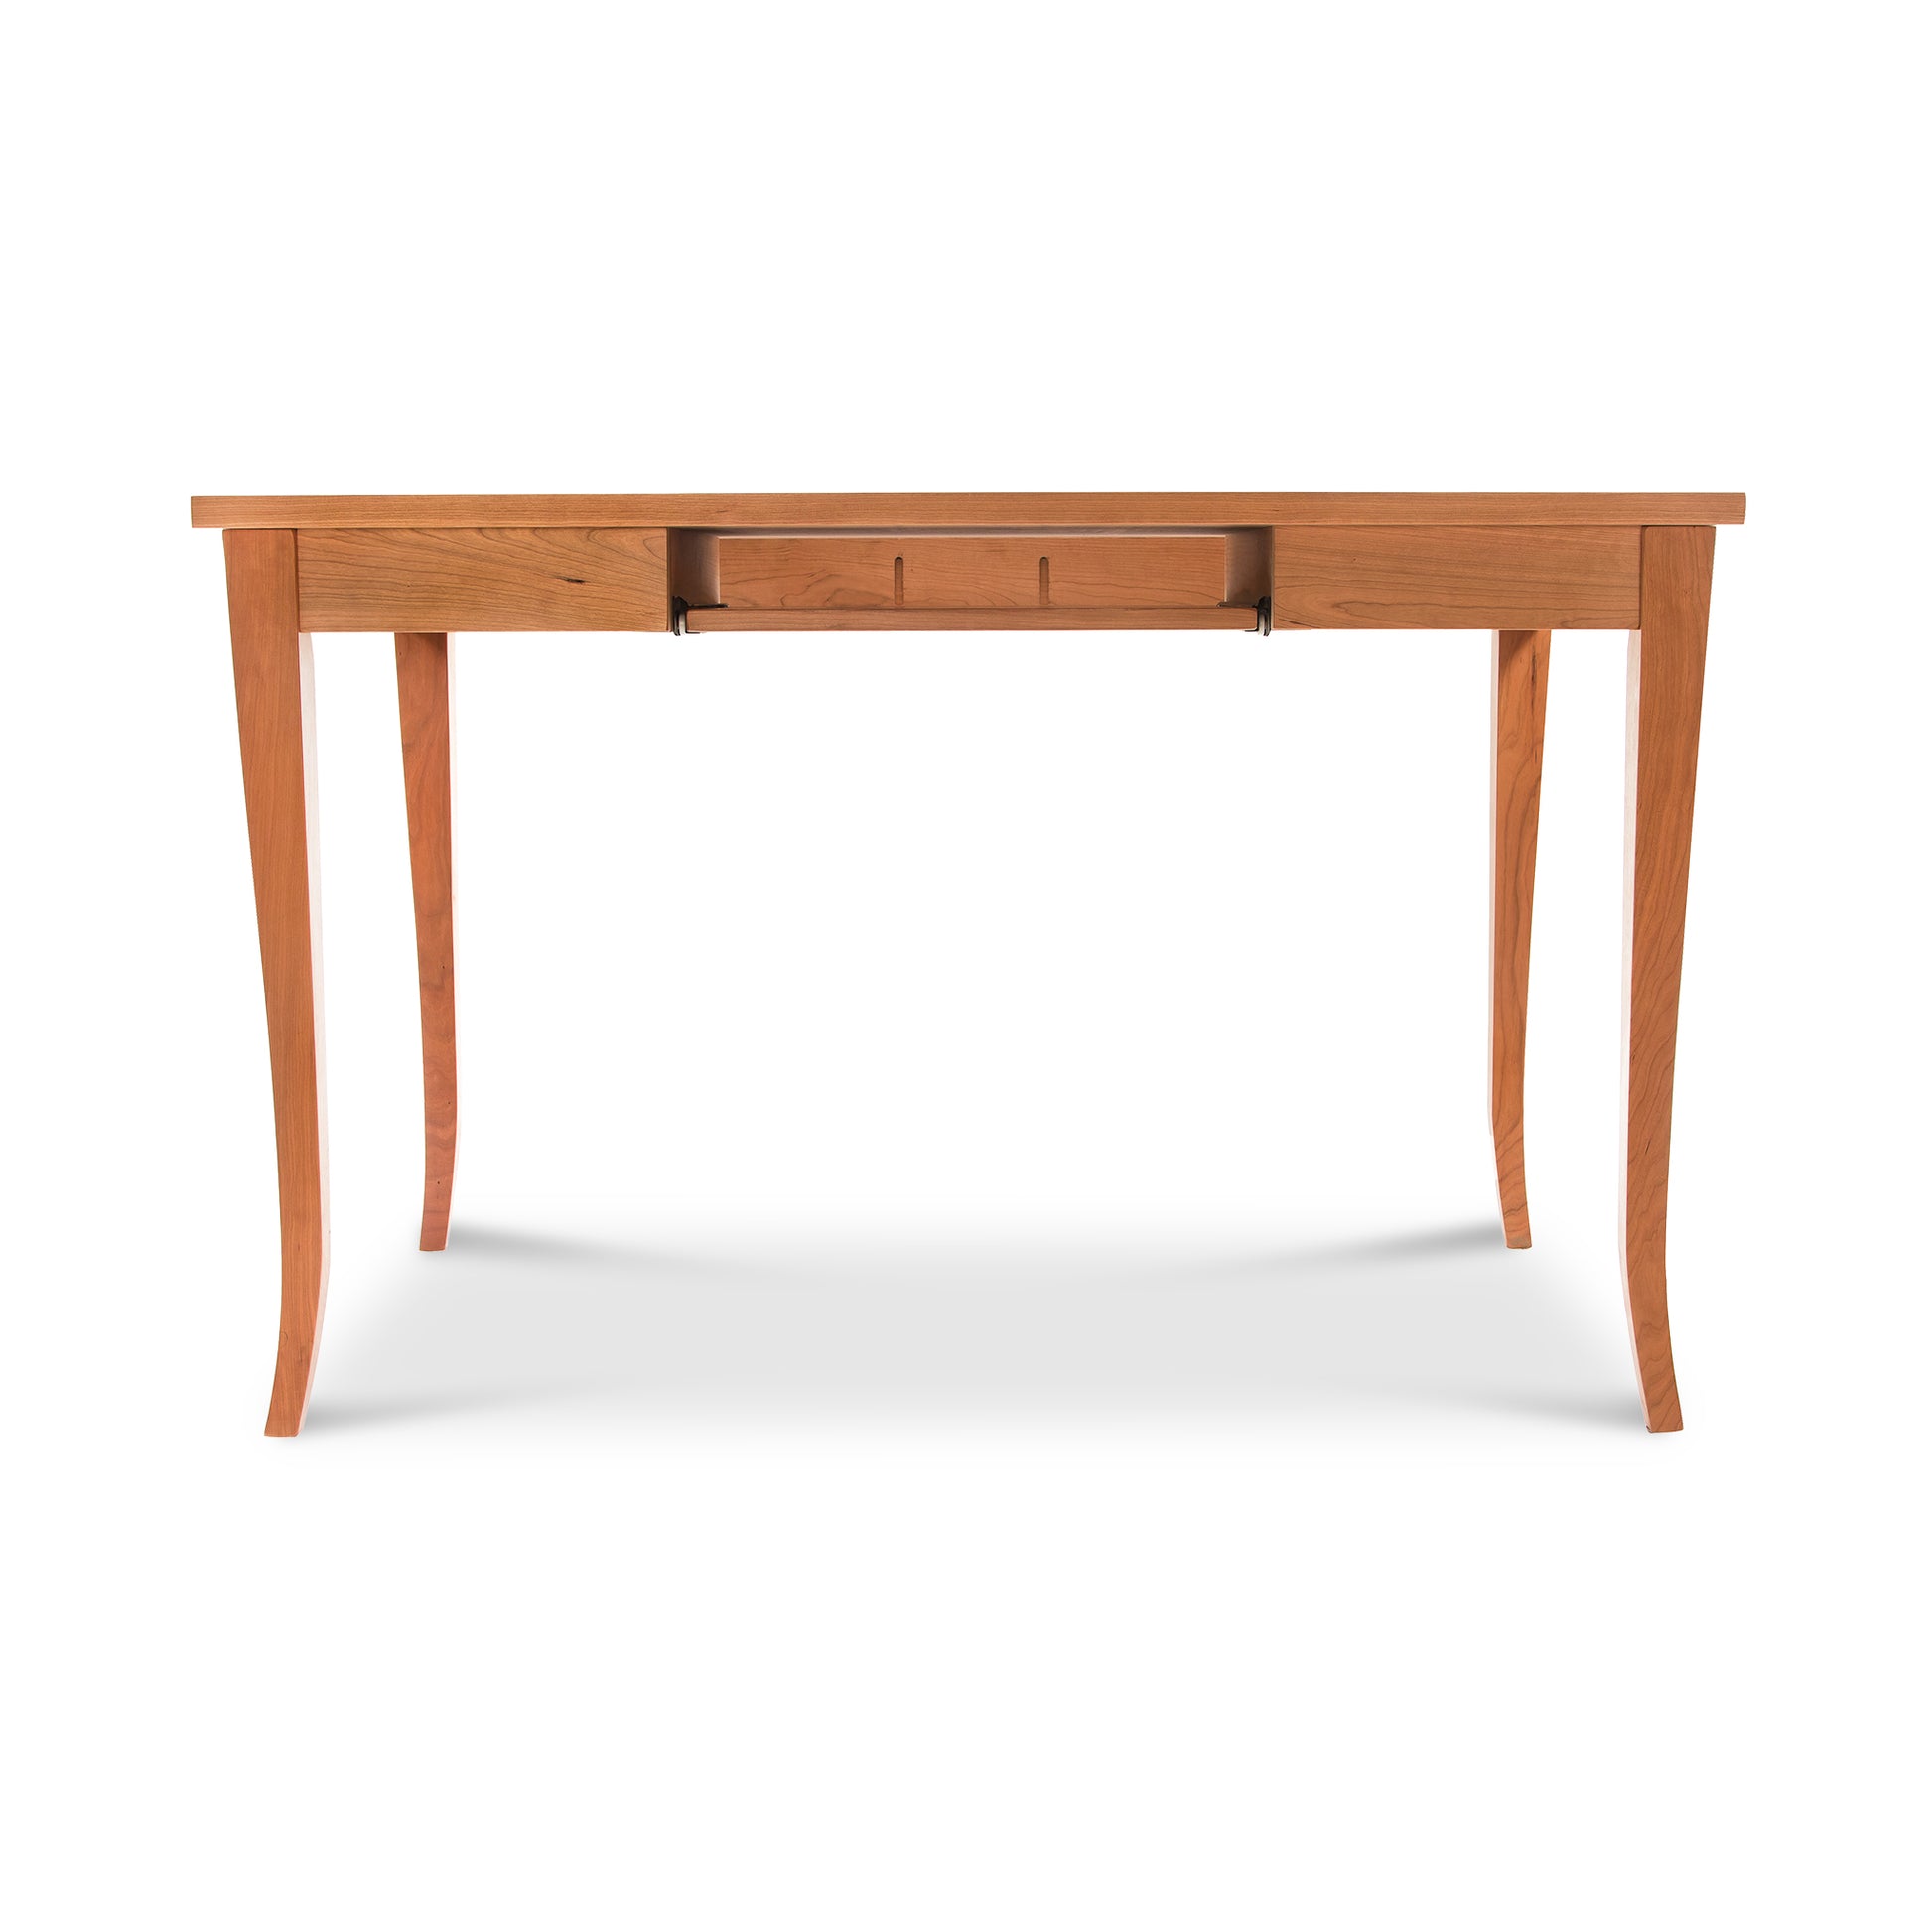 A Classic Shaker Flare Leg Writing Desk with two drawers made by Lyndon Furniture.